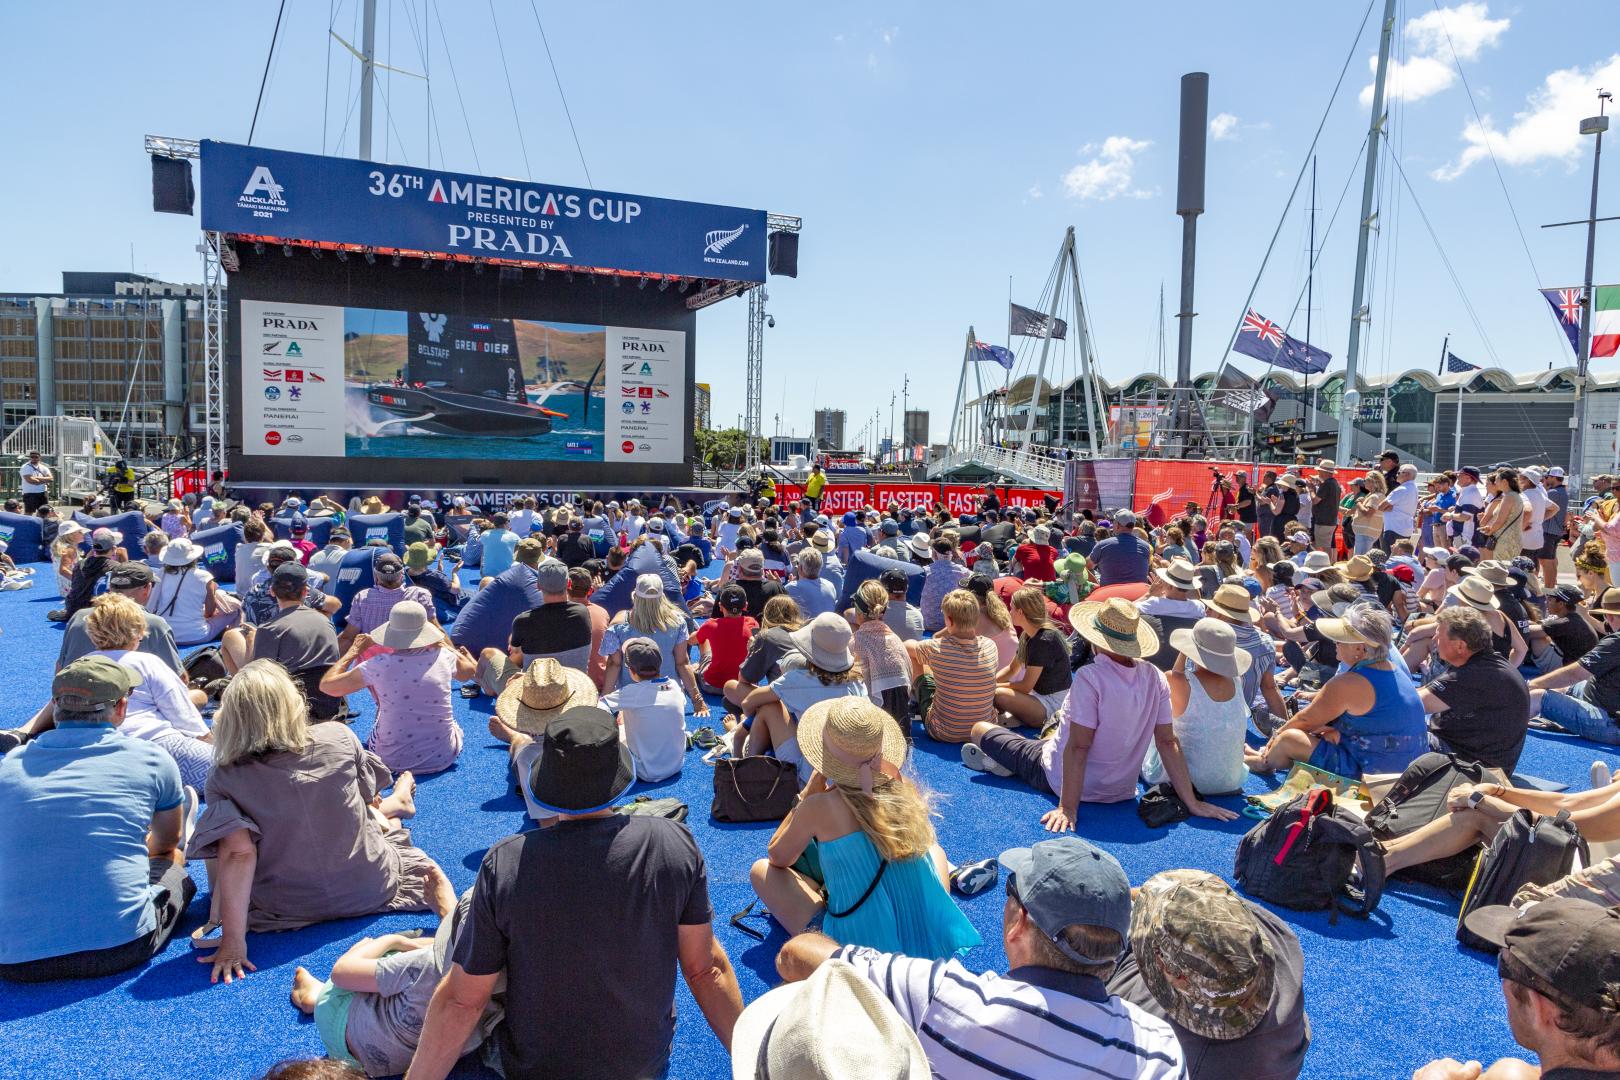 Medallia announced as the Official Feedback Partner of the 36th America’s Cup presented by Prada